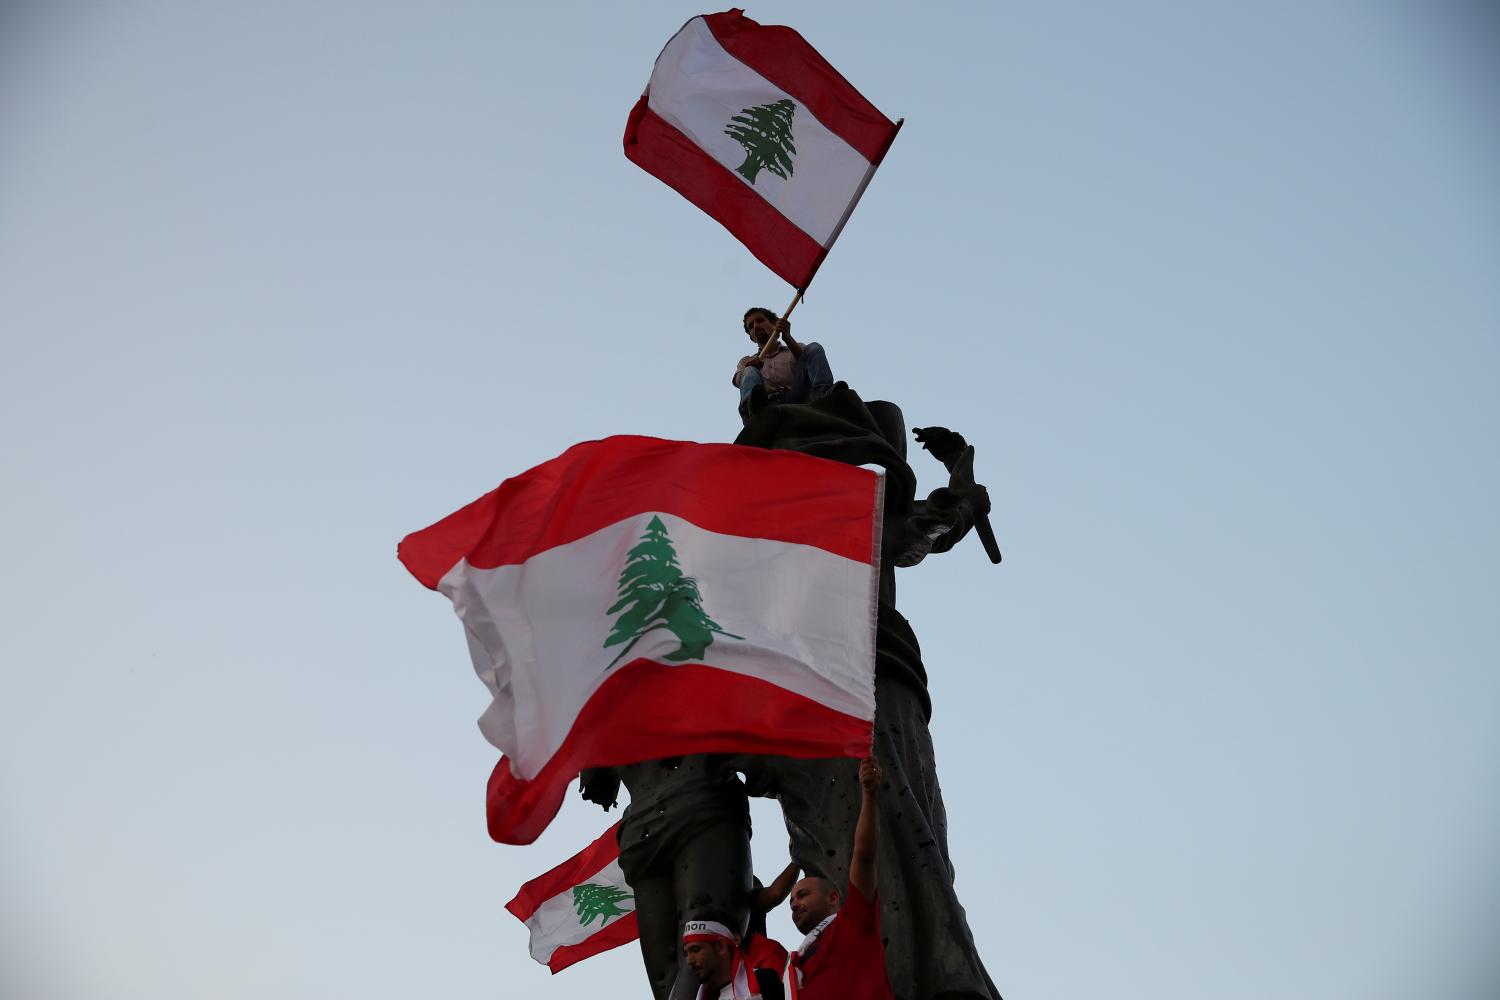 Demonstrators wave Lebanese national flags as they stand atop a statue on Martyrs' square during an anti-government protest in downtown Beirut, Lebanon October 22, 2019. REUTERS/Alkis Konstantinidis - RC1AE78FCA00